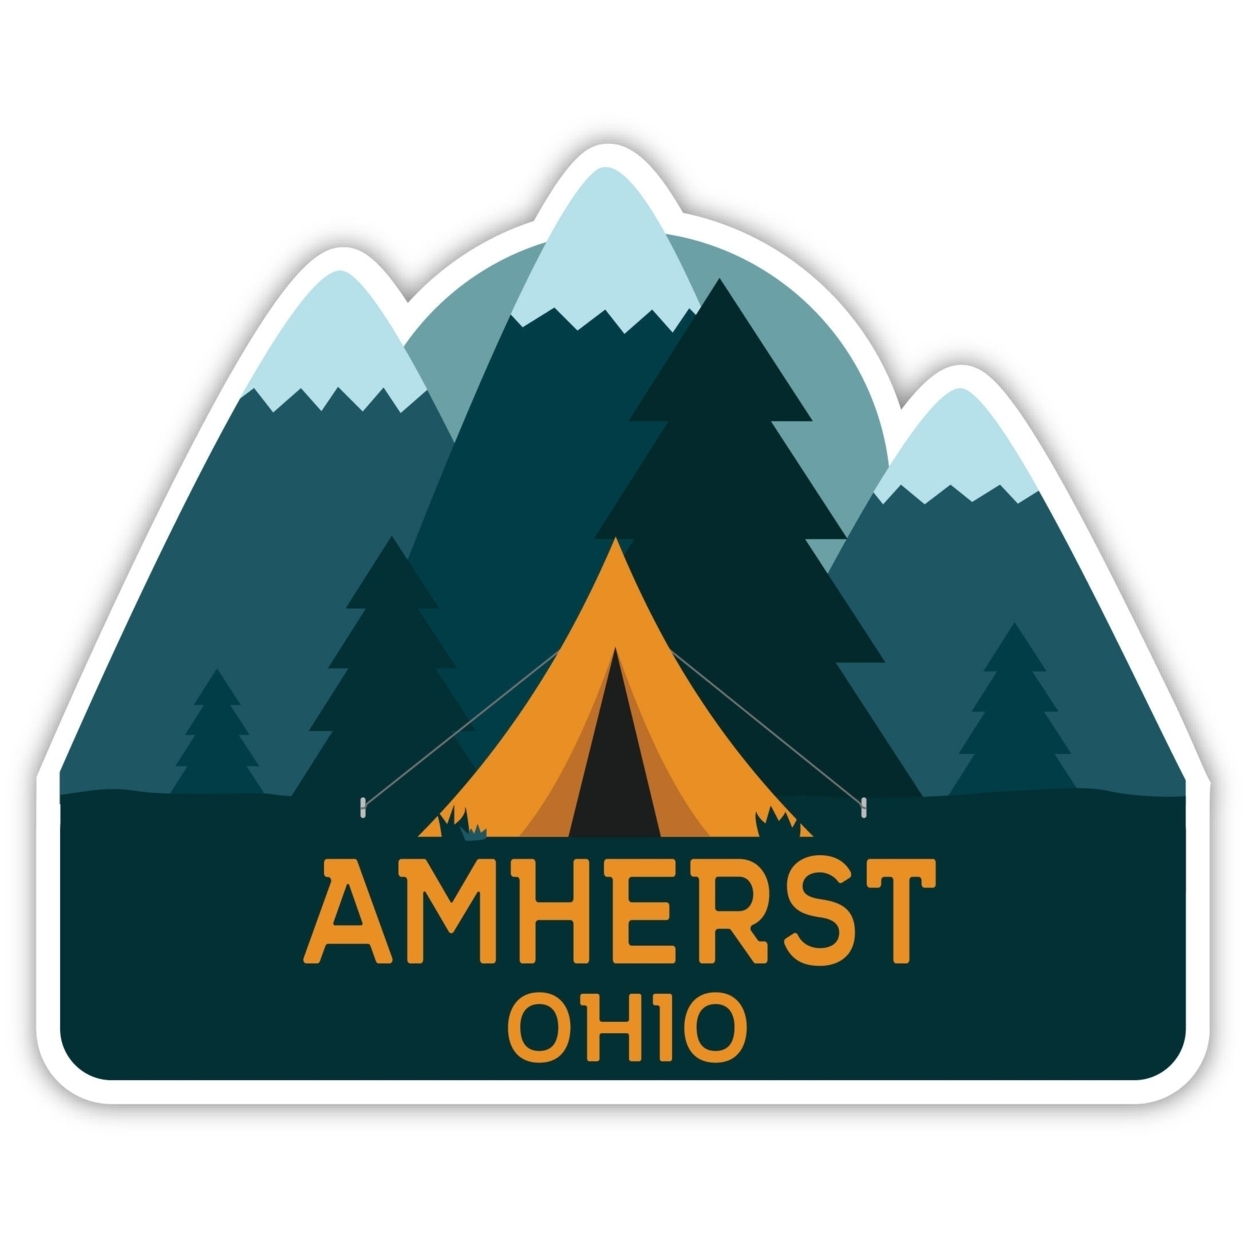 Amherst Ohio Souvenir Decorative Stickers (Choose Theme And Size) - 4-Pack, 12-Inch, Tent